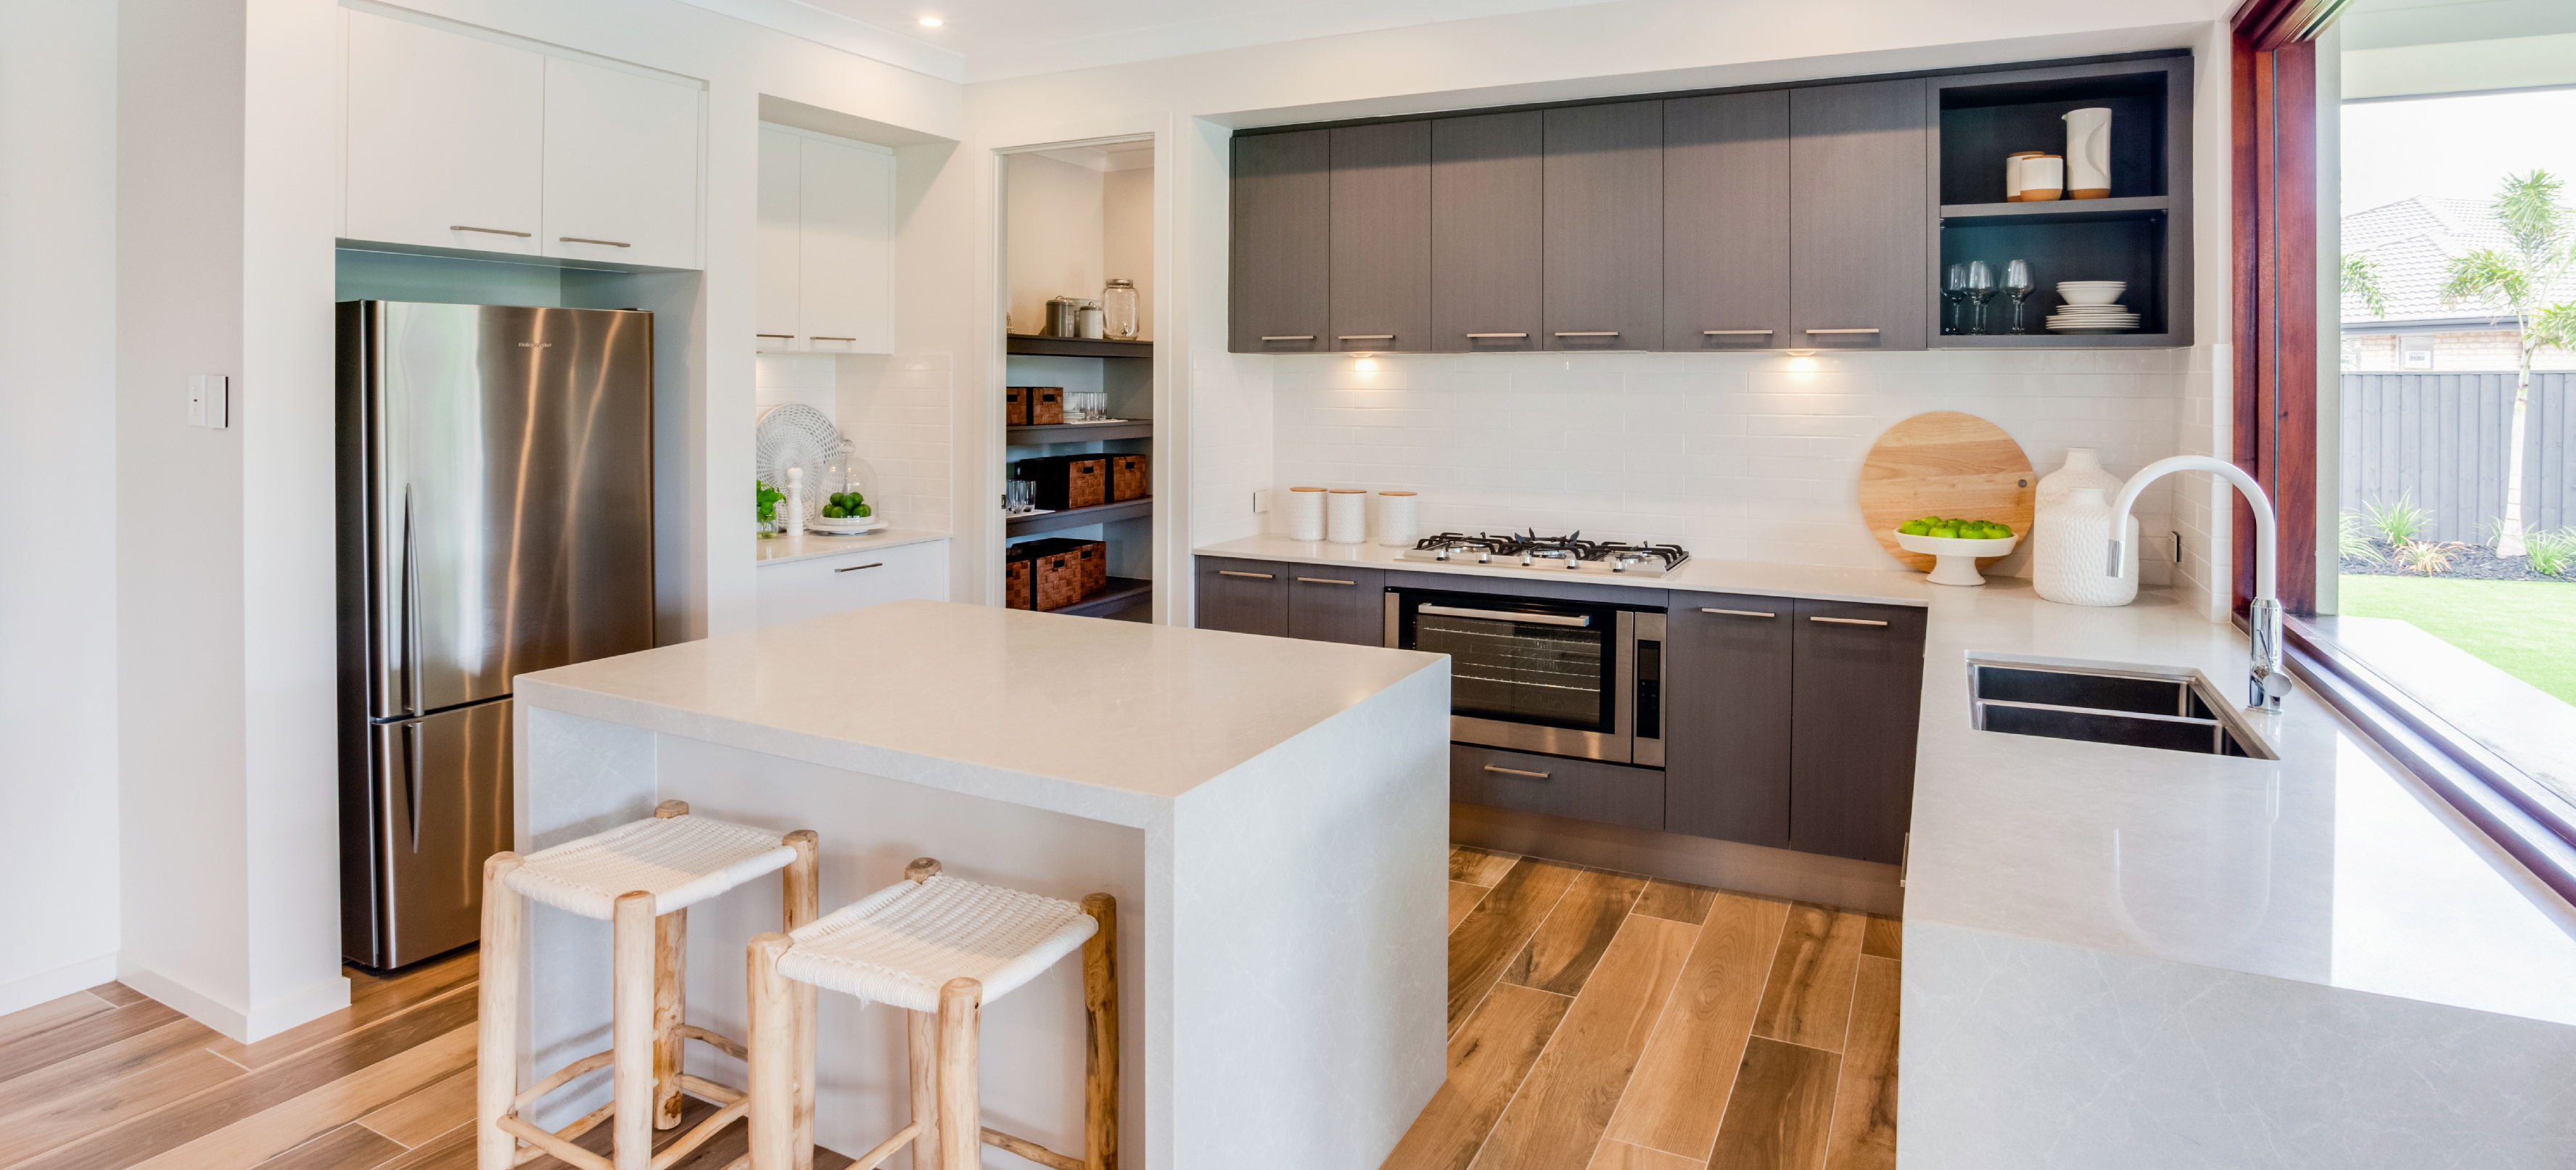 The Advantages of Installing a Modular Kitchen in Your Home